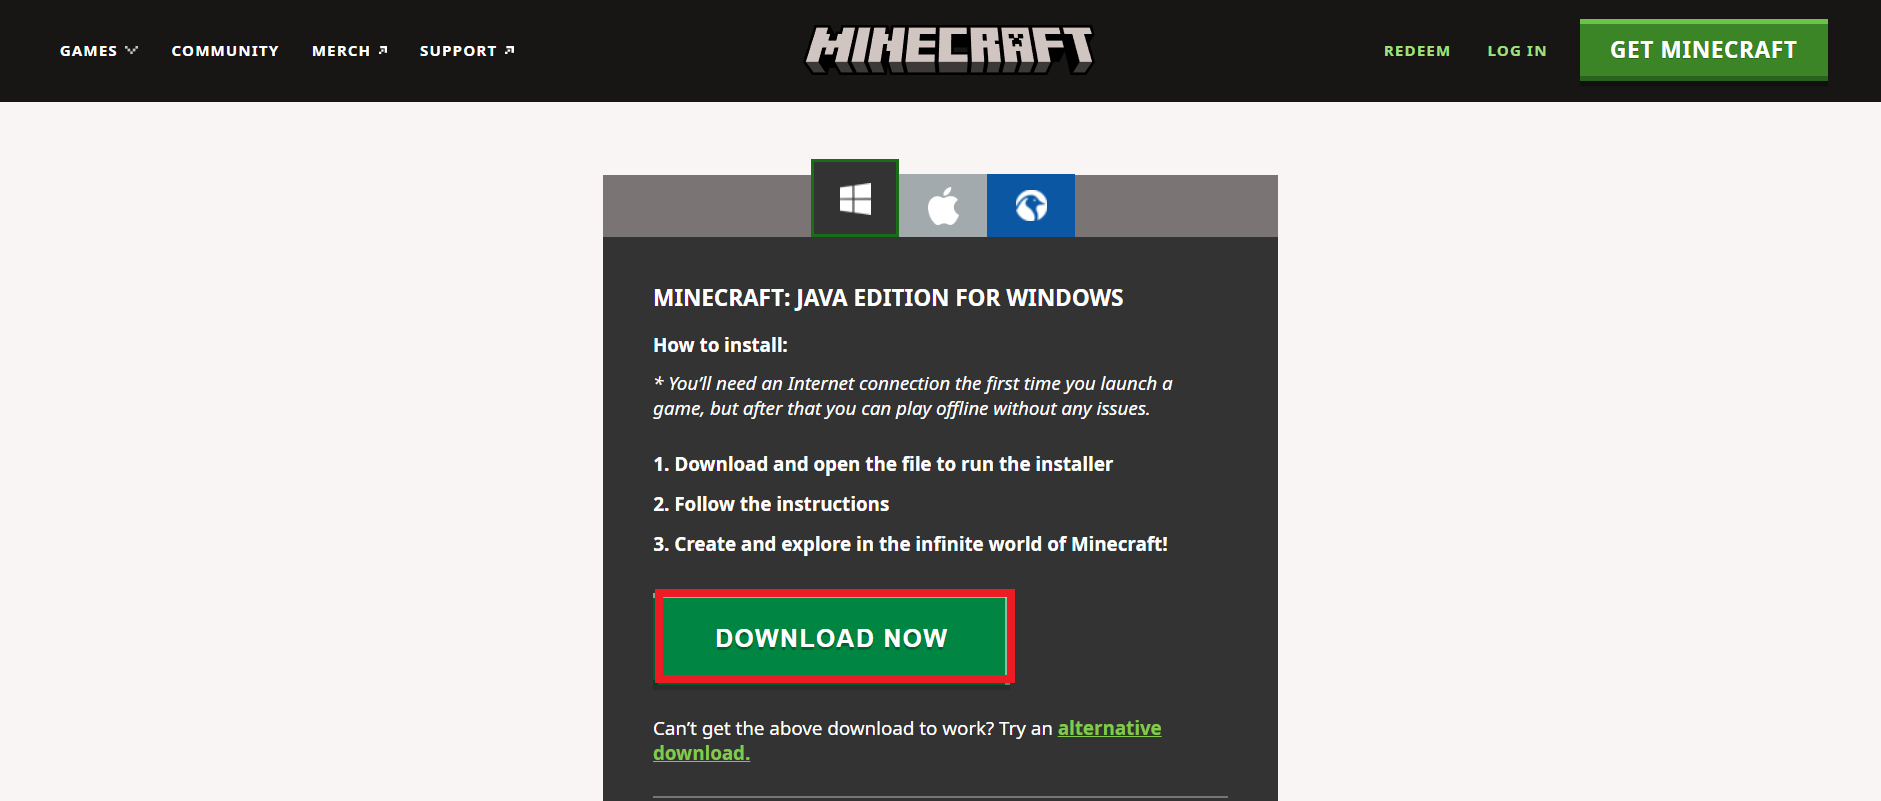 Scroll down and click the Download Now option under MINECRAFT JAVA EDITION FOR WINDOWS, as shown below